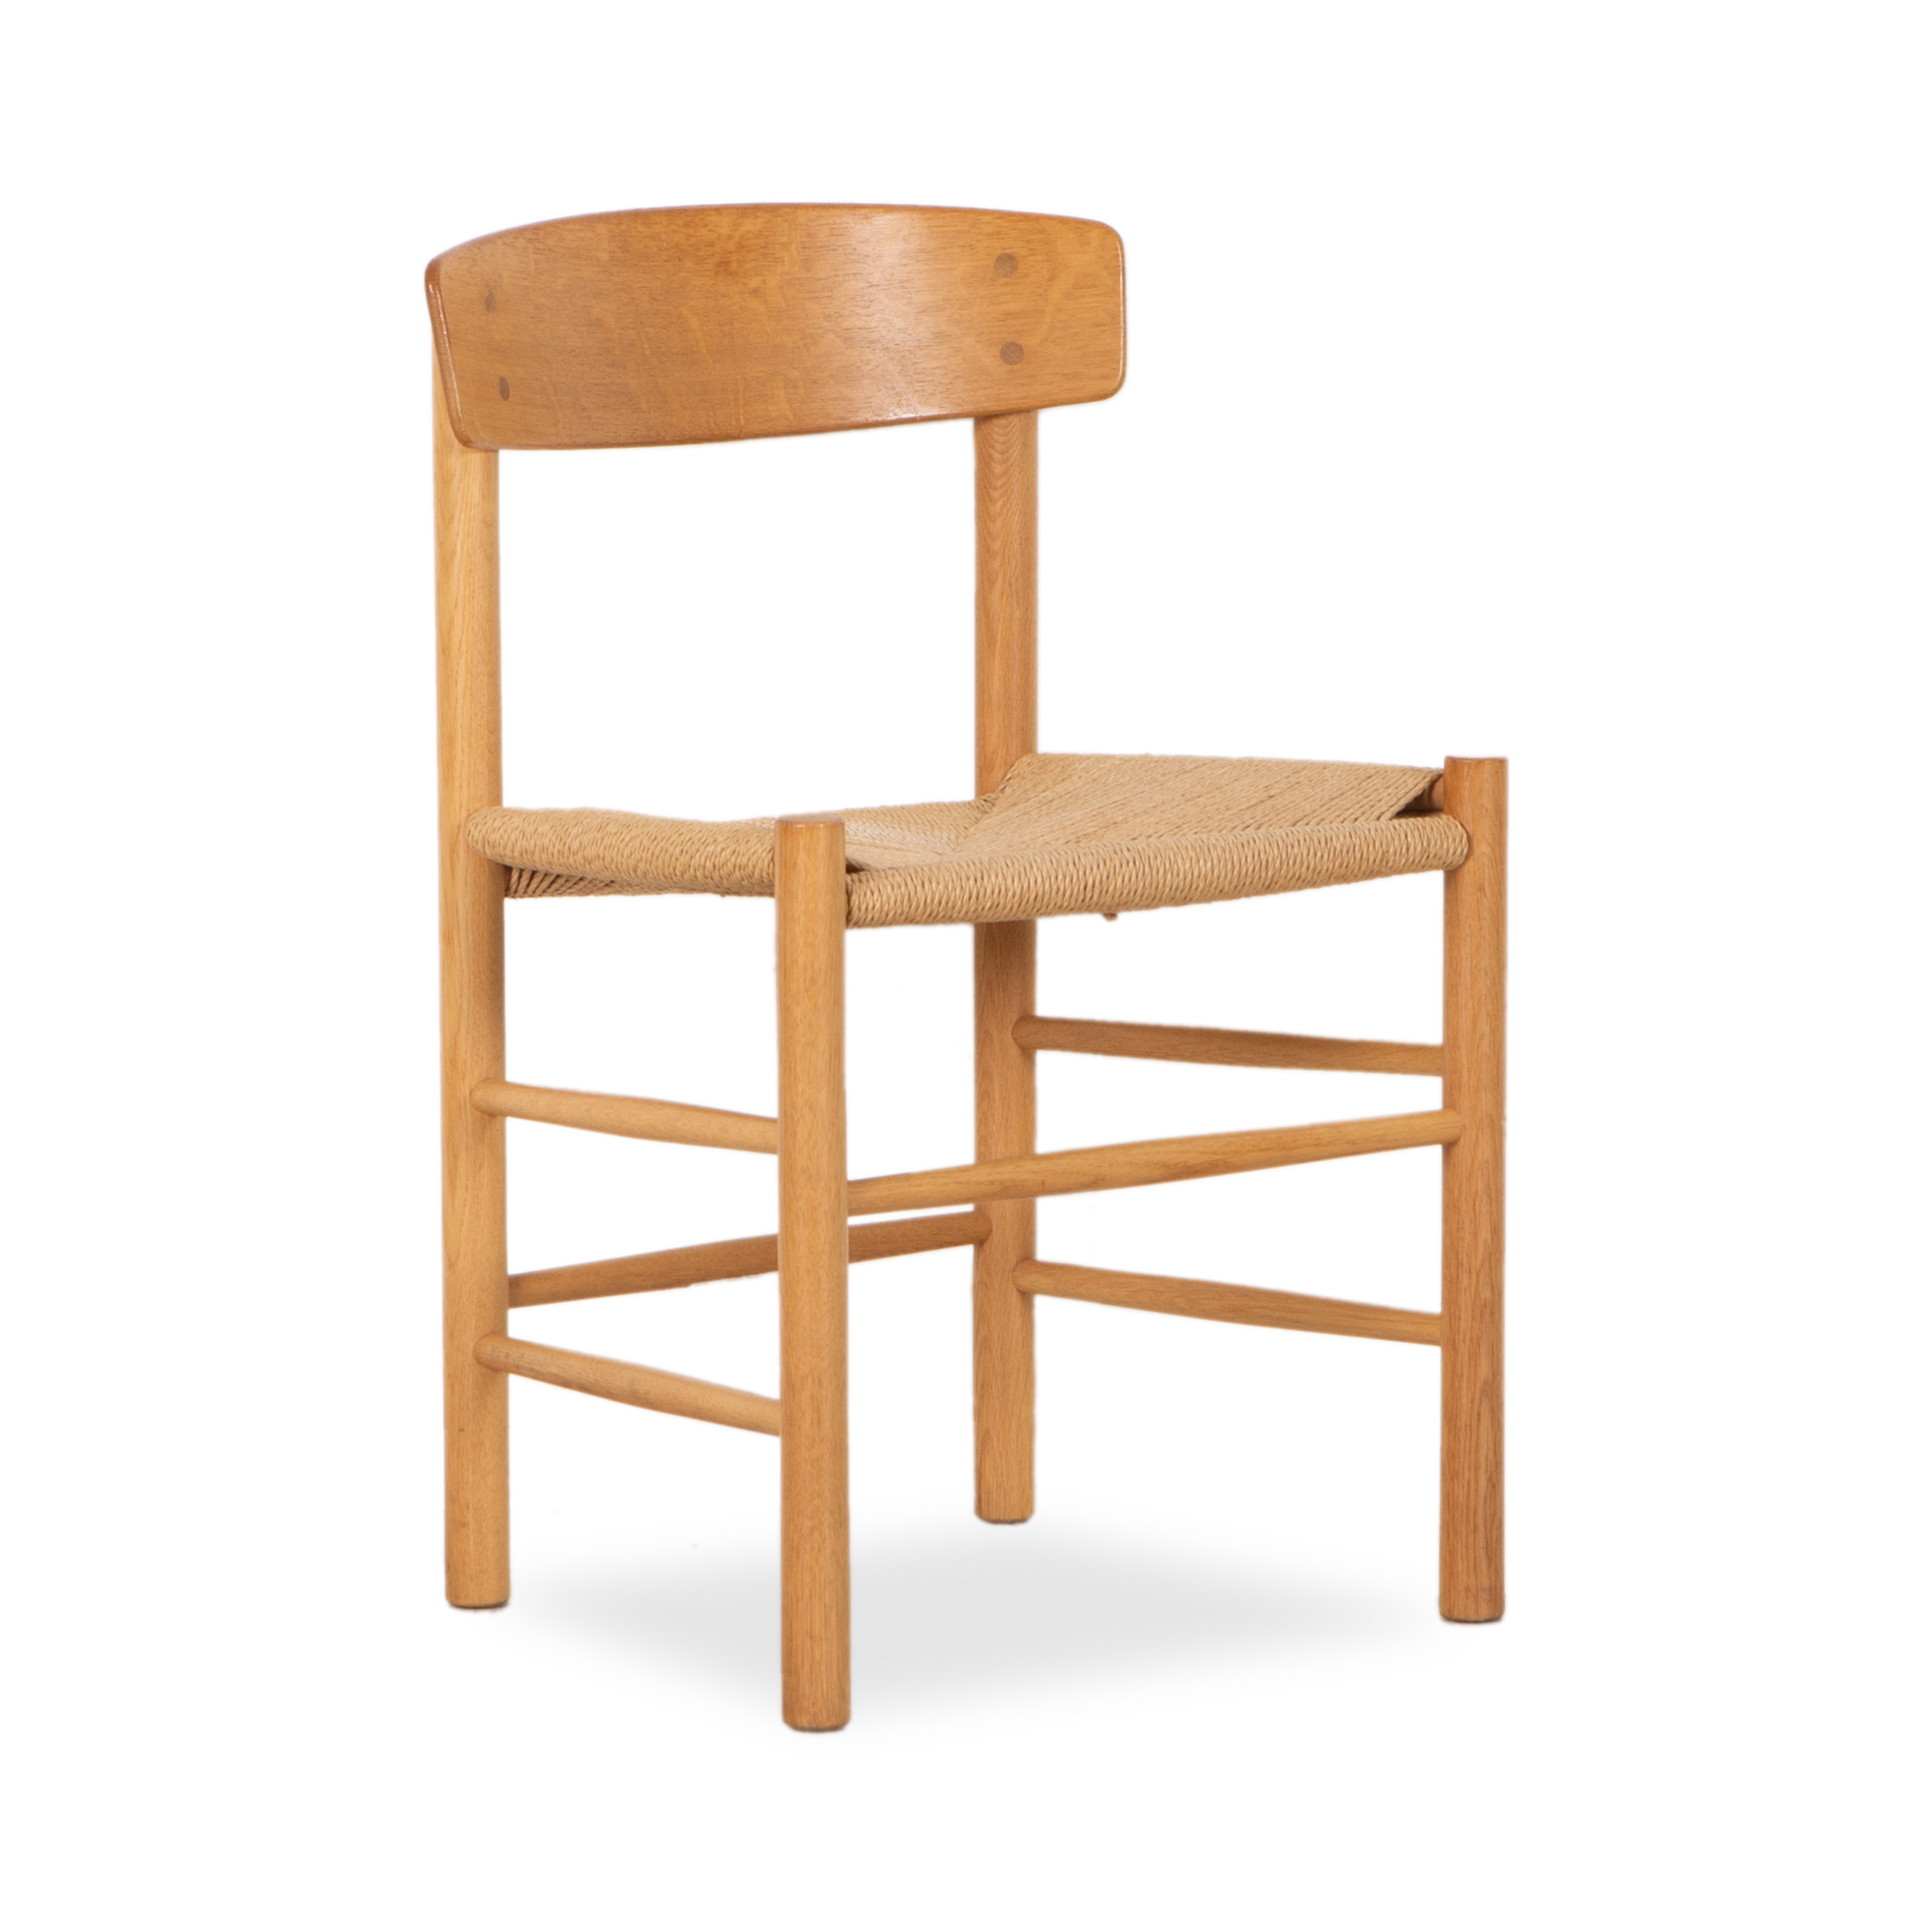 A display of fine craftsmanship, this vintage J39 Chair was designed by Borge Mogensen and manufactured by Fredericia Stolefabrik, circa 1940s.